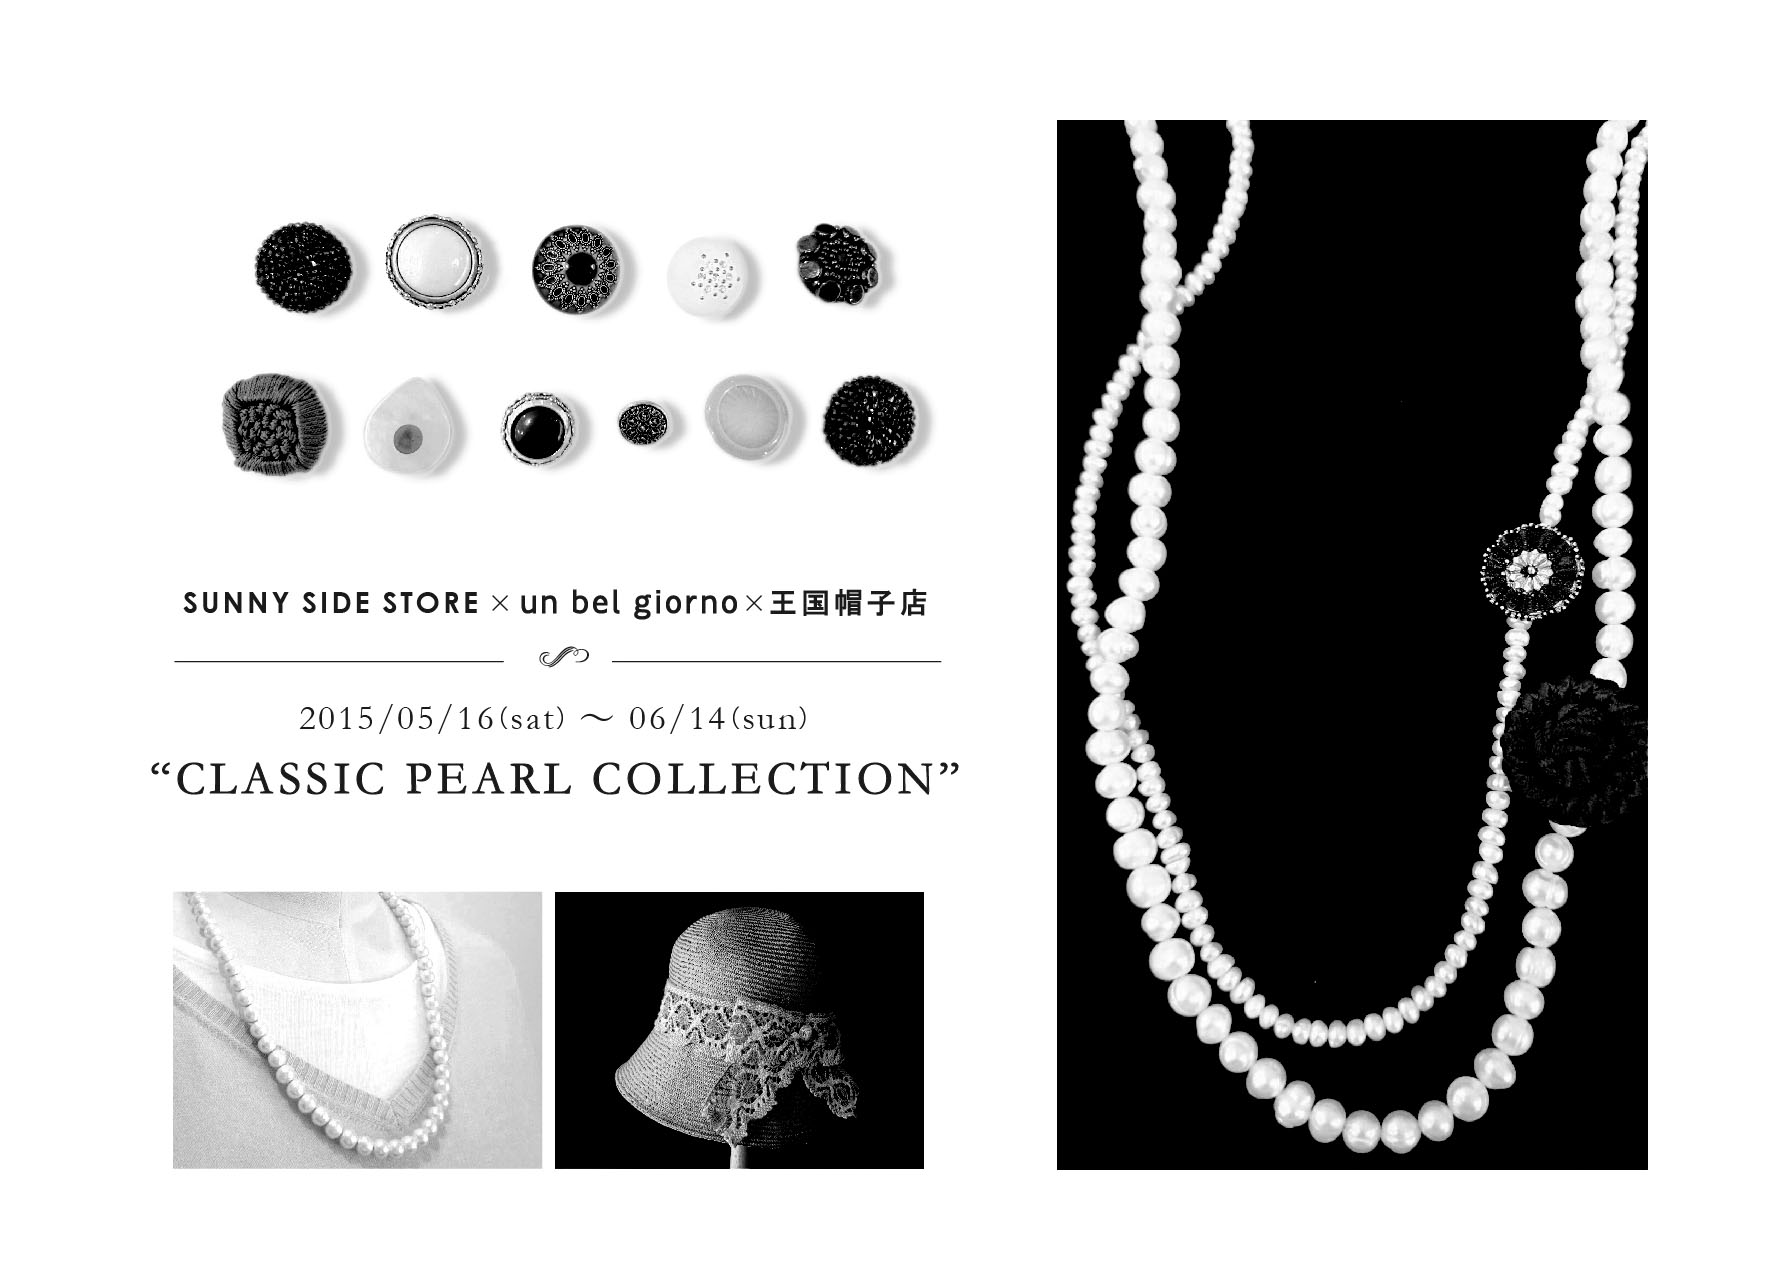 ClassicPearlCollection_1.jpg